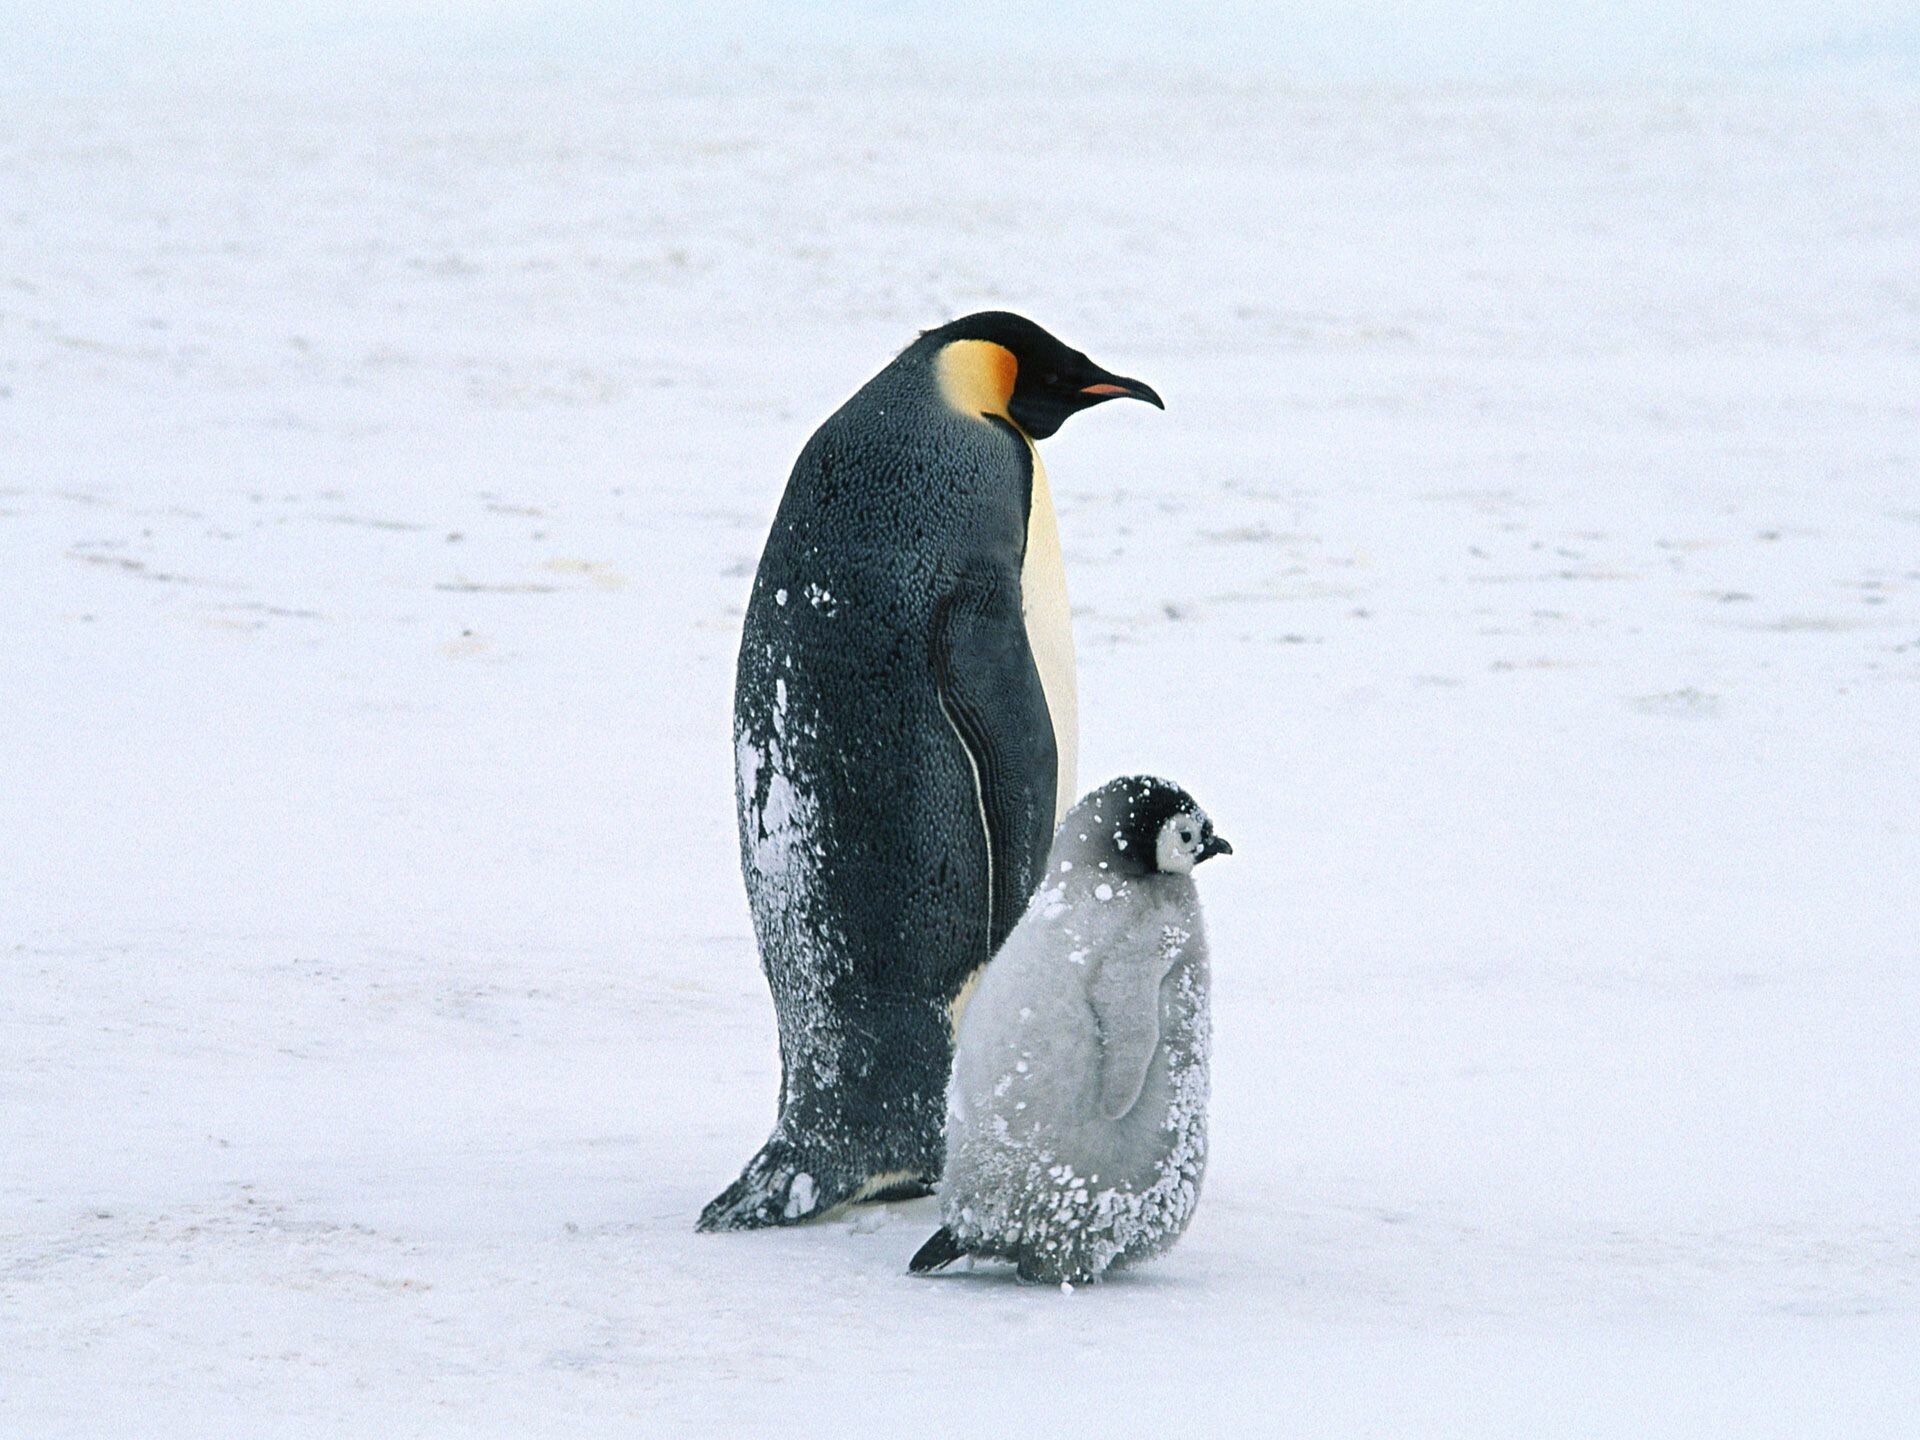 Penguin, Baby penguins, HD wallpapers, Cute and fluffy, 1920x1440 HD Desktop